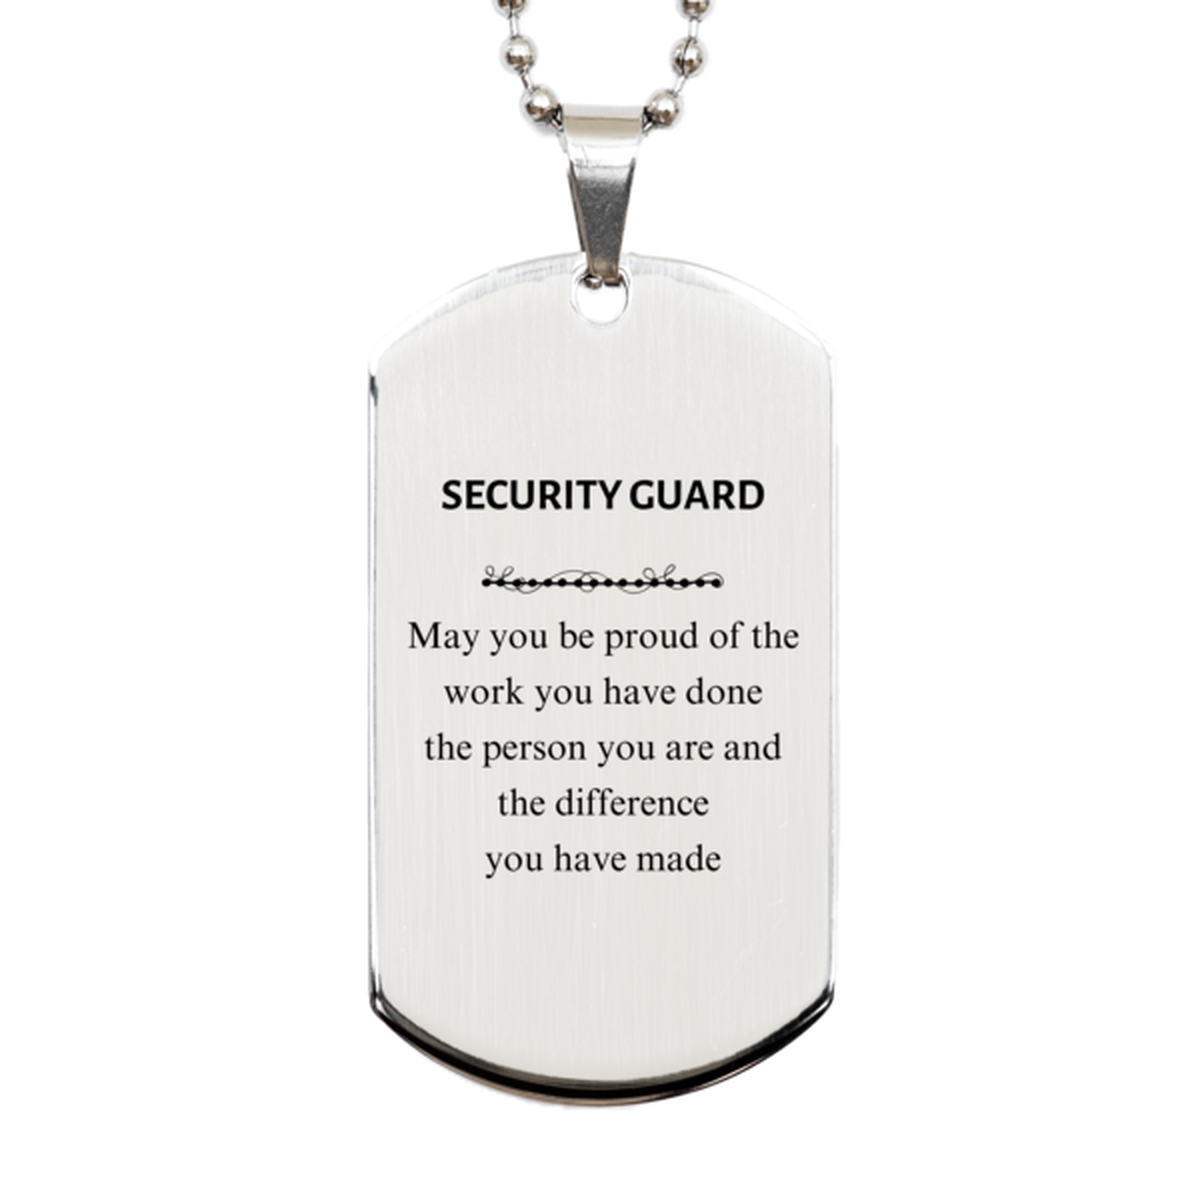 Security Guard May you be proud of the work you have done, Retirement Security Guard Silver Dog Tag for Colleague Appreciation Gifts Amazing for Security Guard